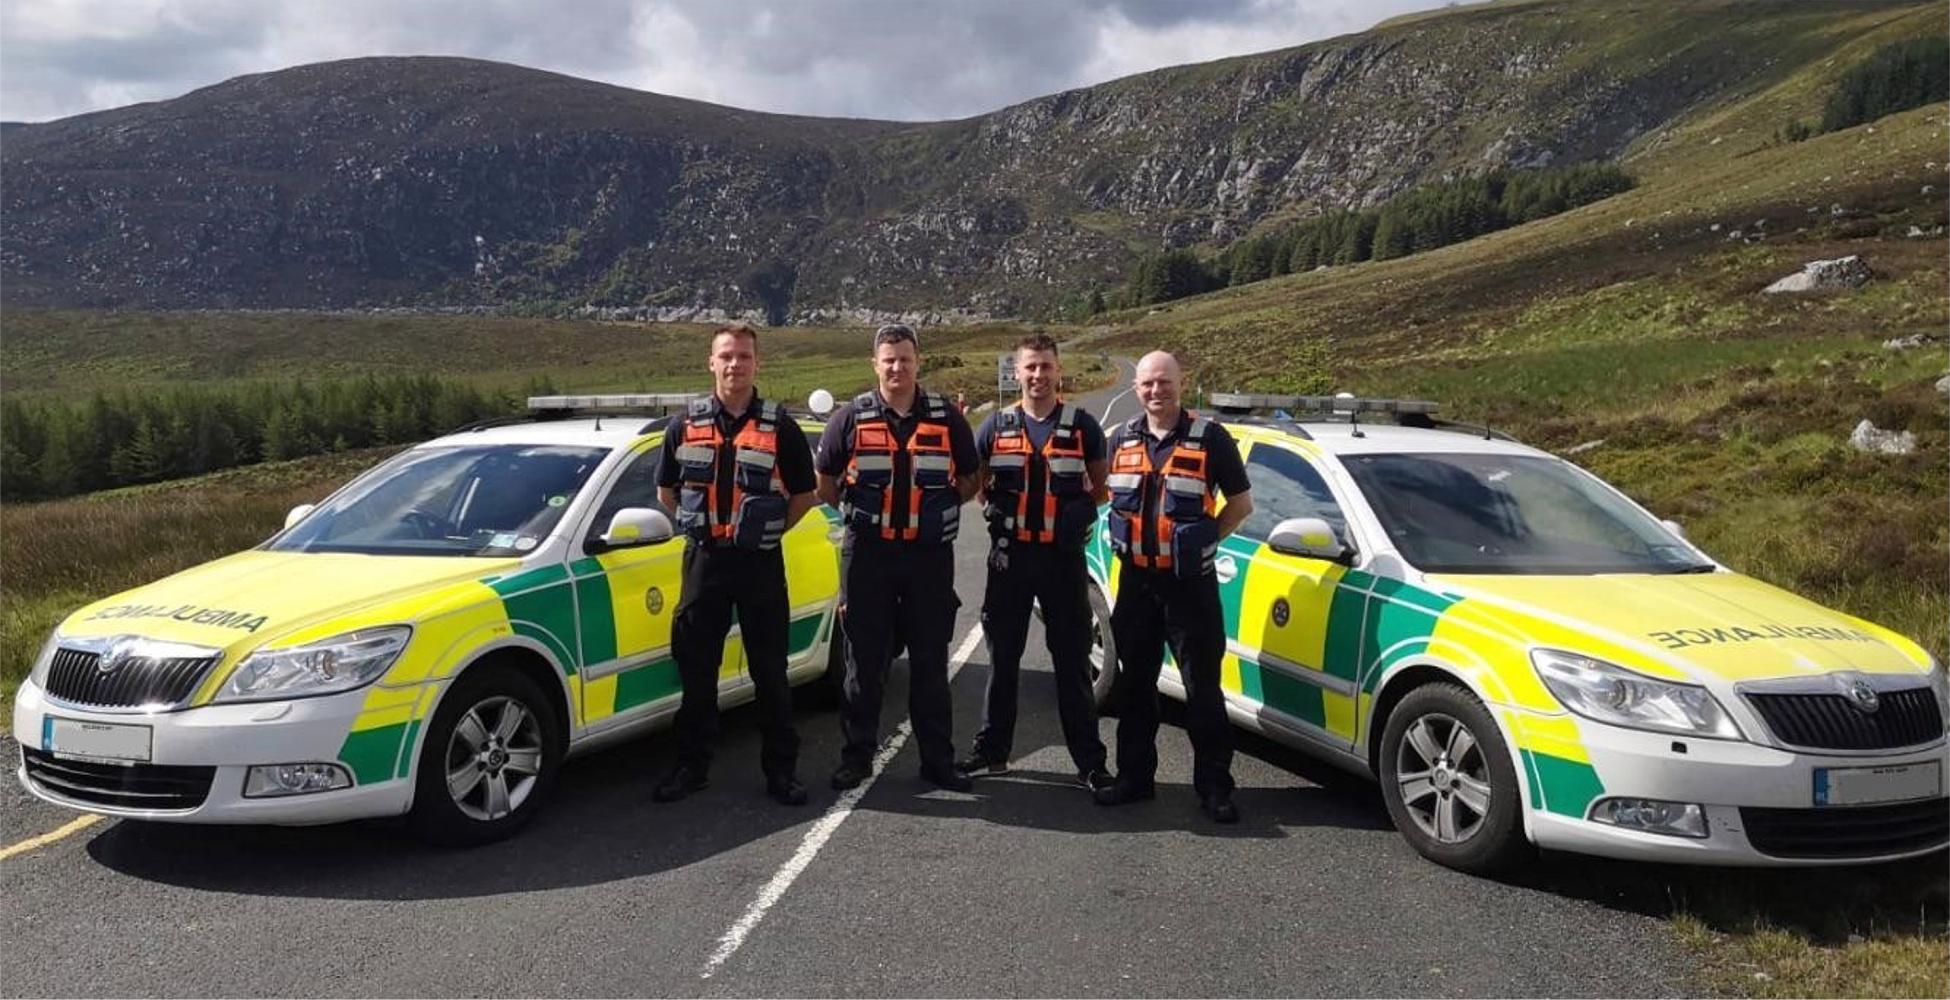 Event Medical professions and ambulances as supplied by Fire-Medics, Event Fire, Rescue & Emergency Medical Cover specialists, Belfast, Dublin, Donegal / Sligo providing an all Ireland service.